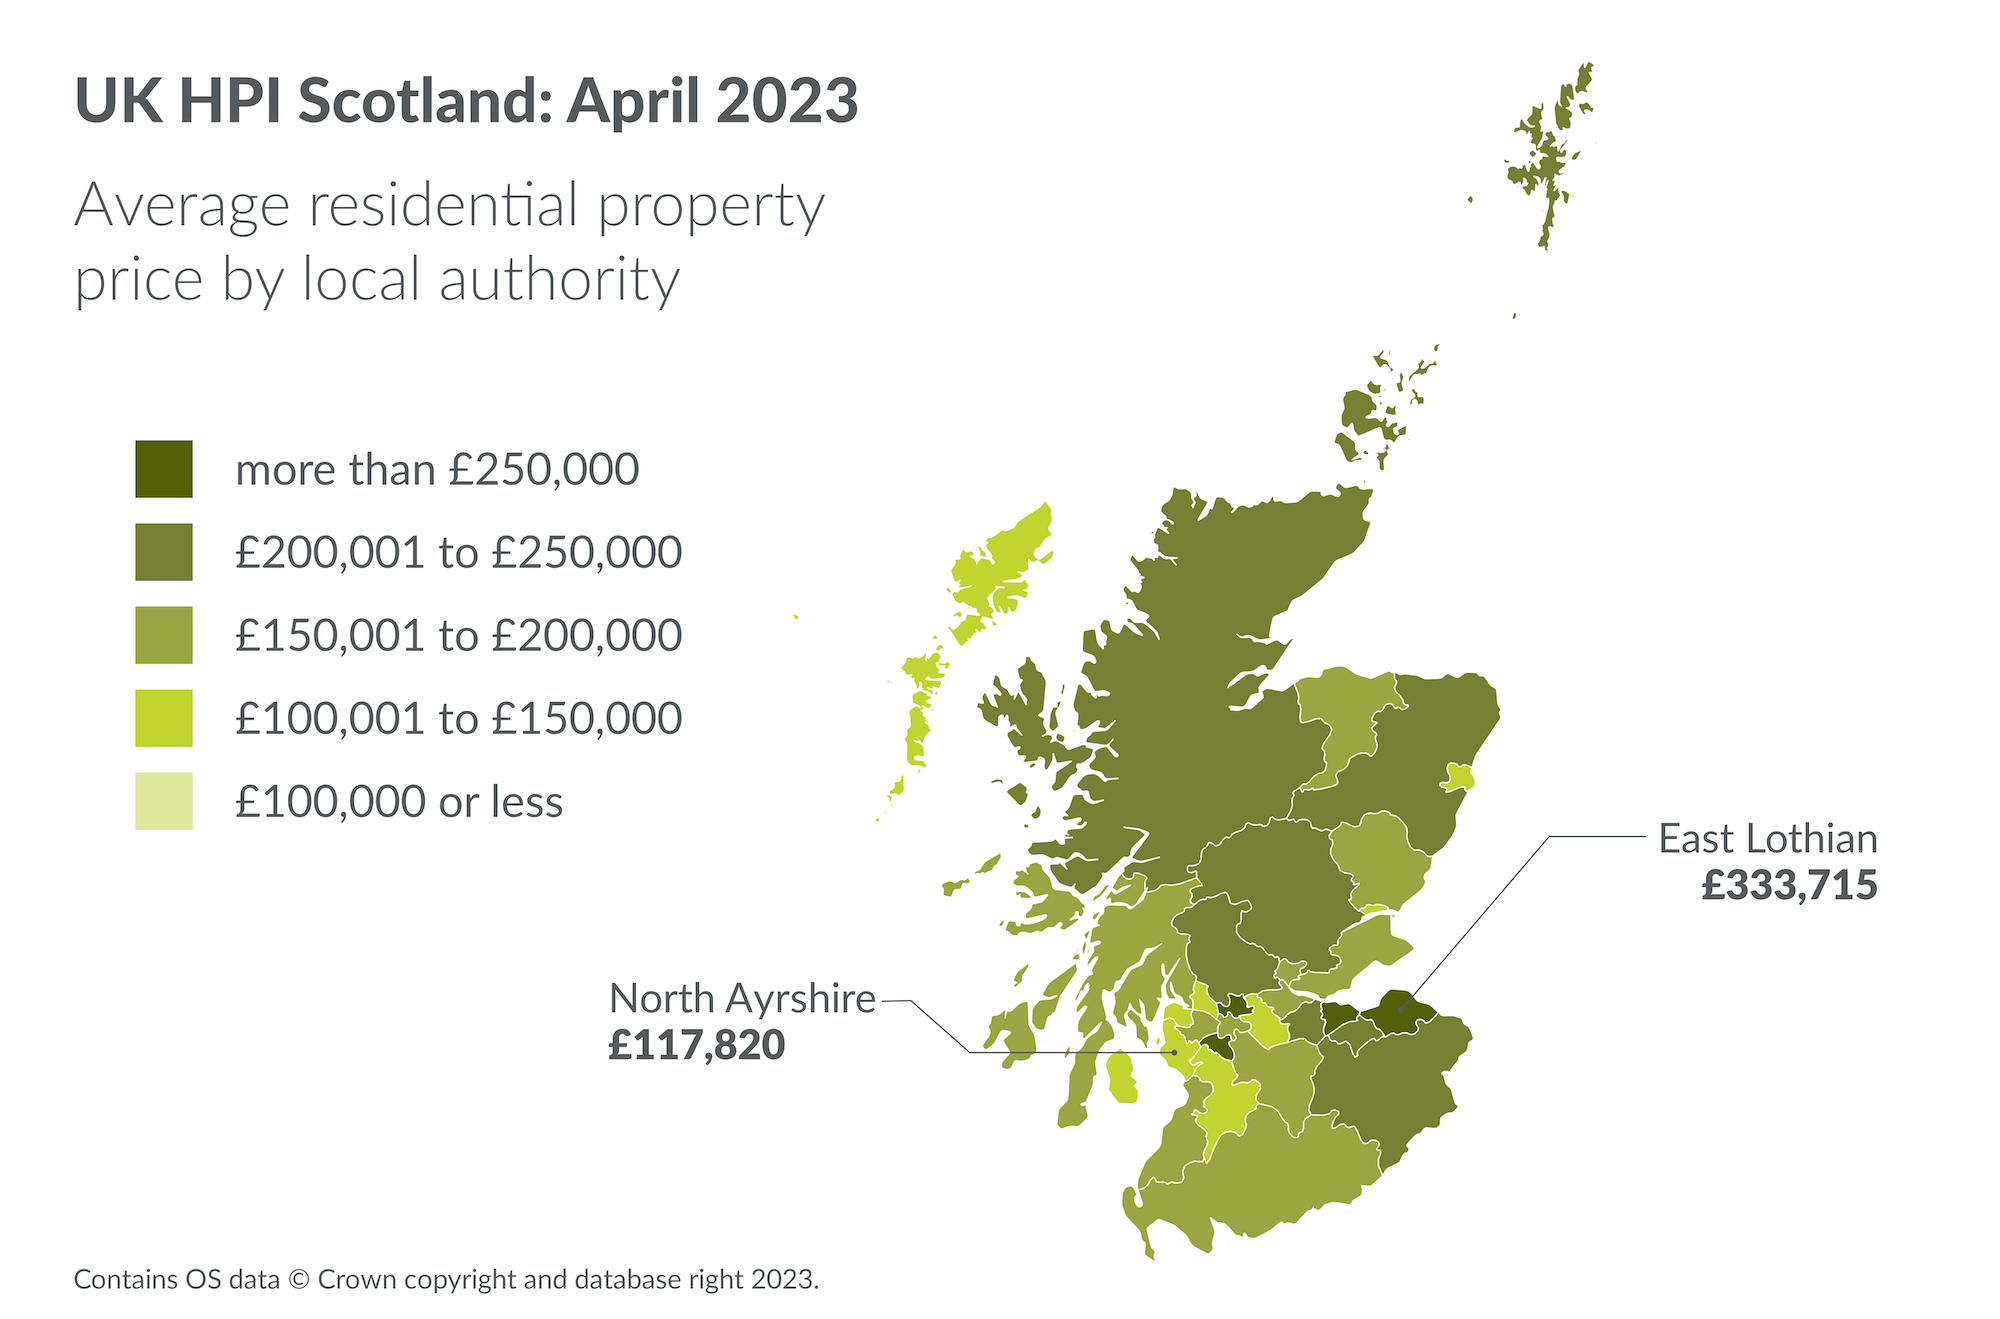 Scotland's house prices rise amid declining sales